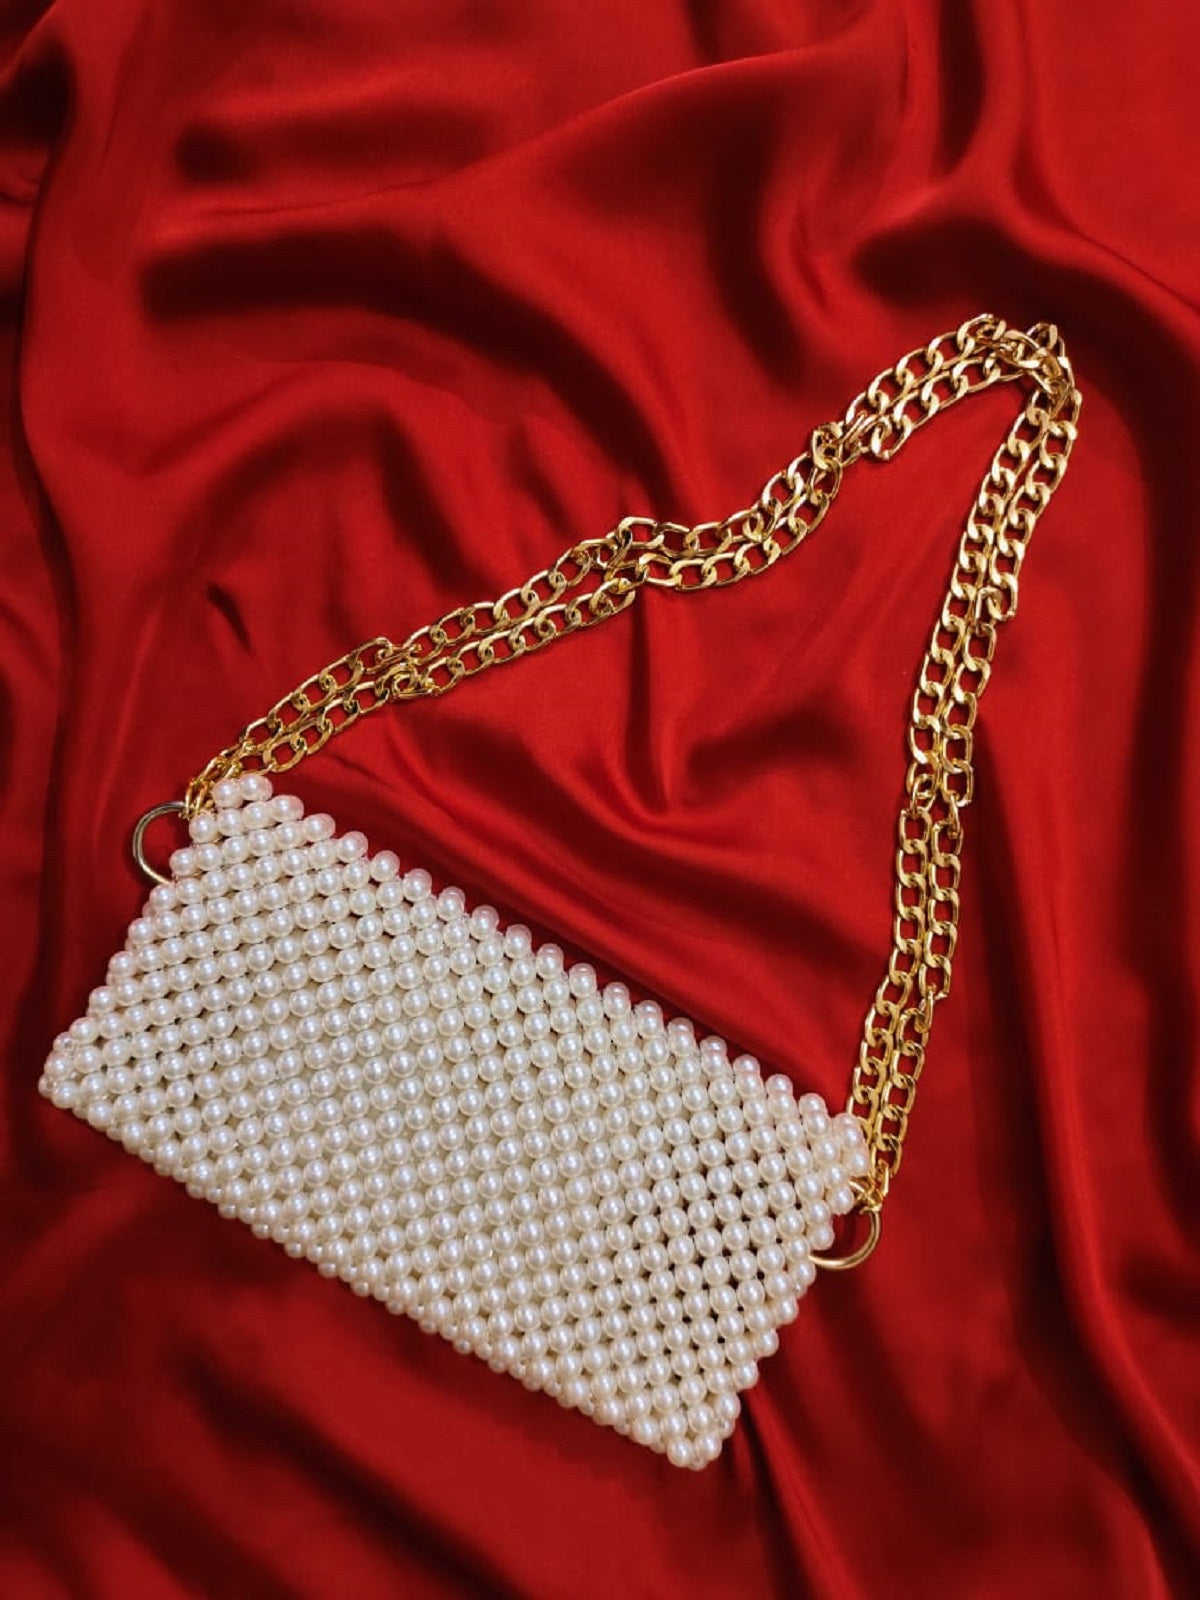 Off-white beaded shoulder bag embellished with intricate patterns, complemented by a shimmering golden strap